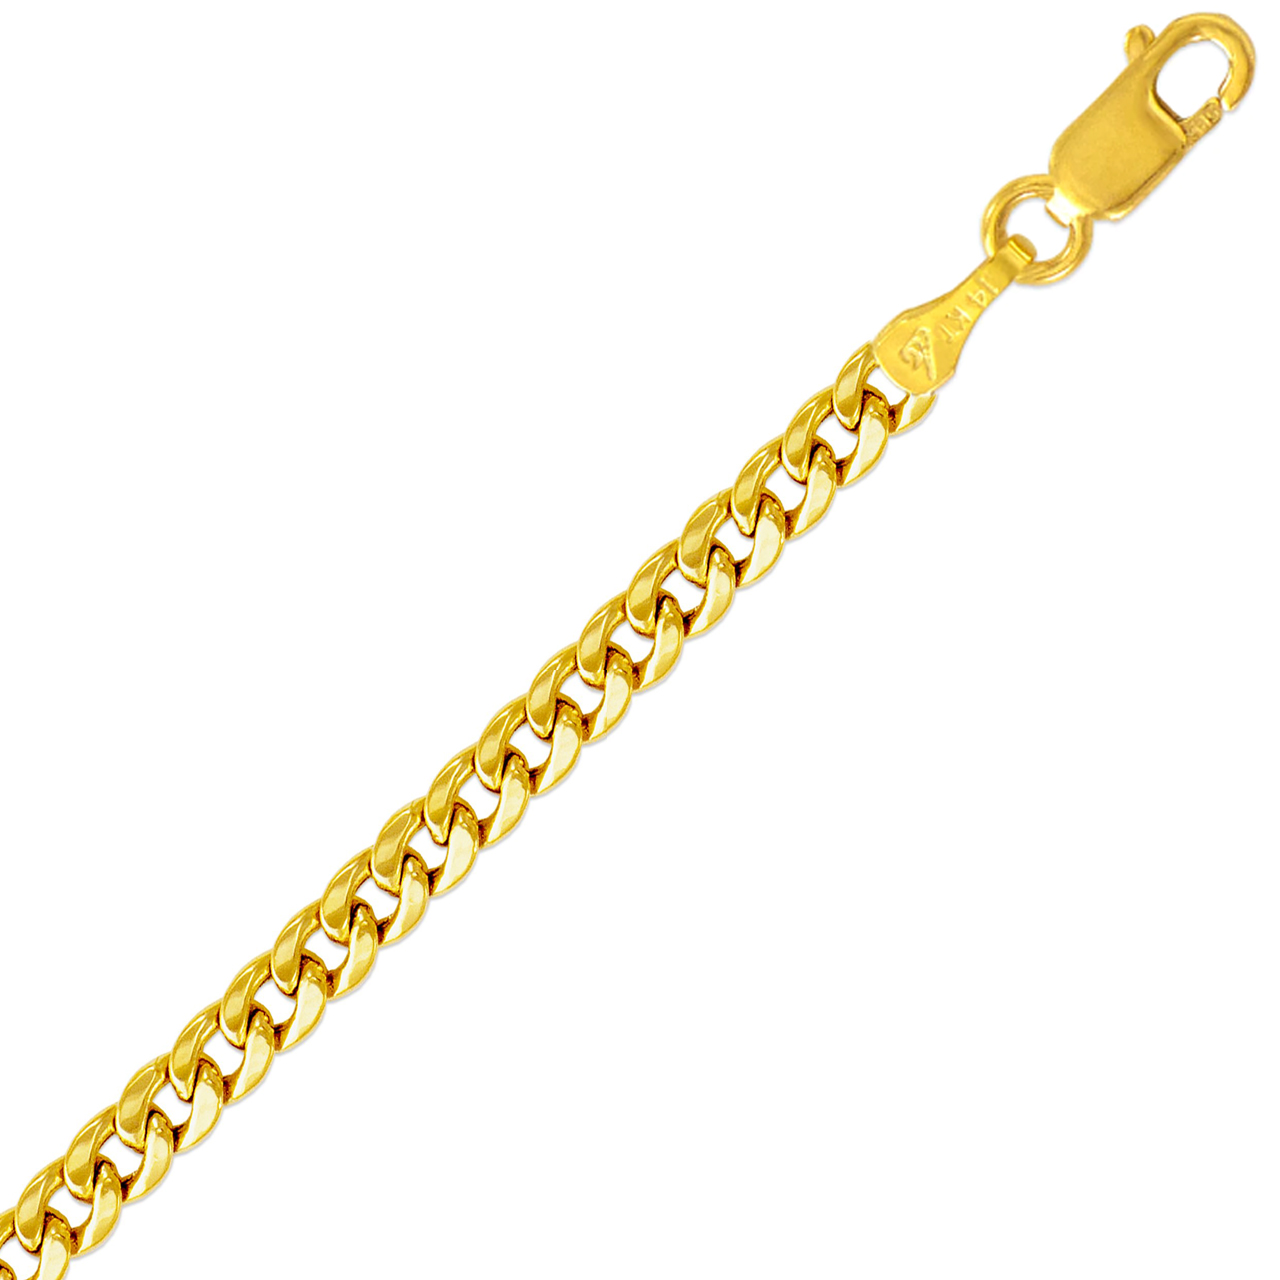 DoubleAccent 14K Gold Necklace Hollow Miami Curb Chain Necklace (16, 18, 20, 22, 24, 26")